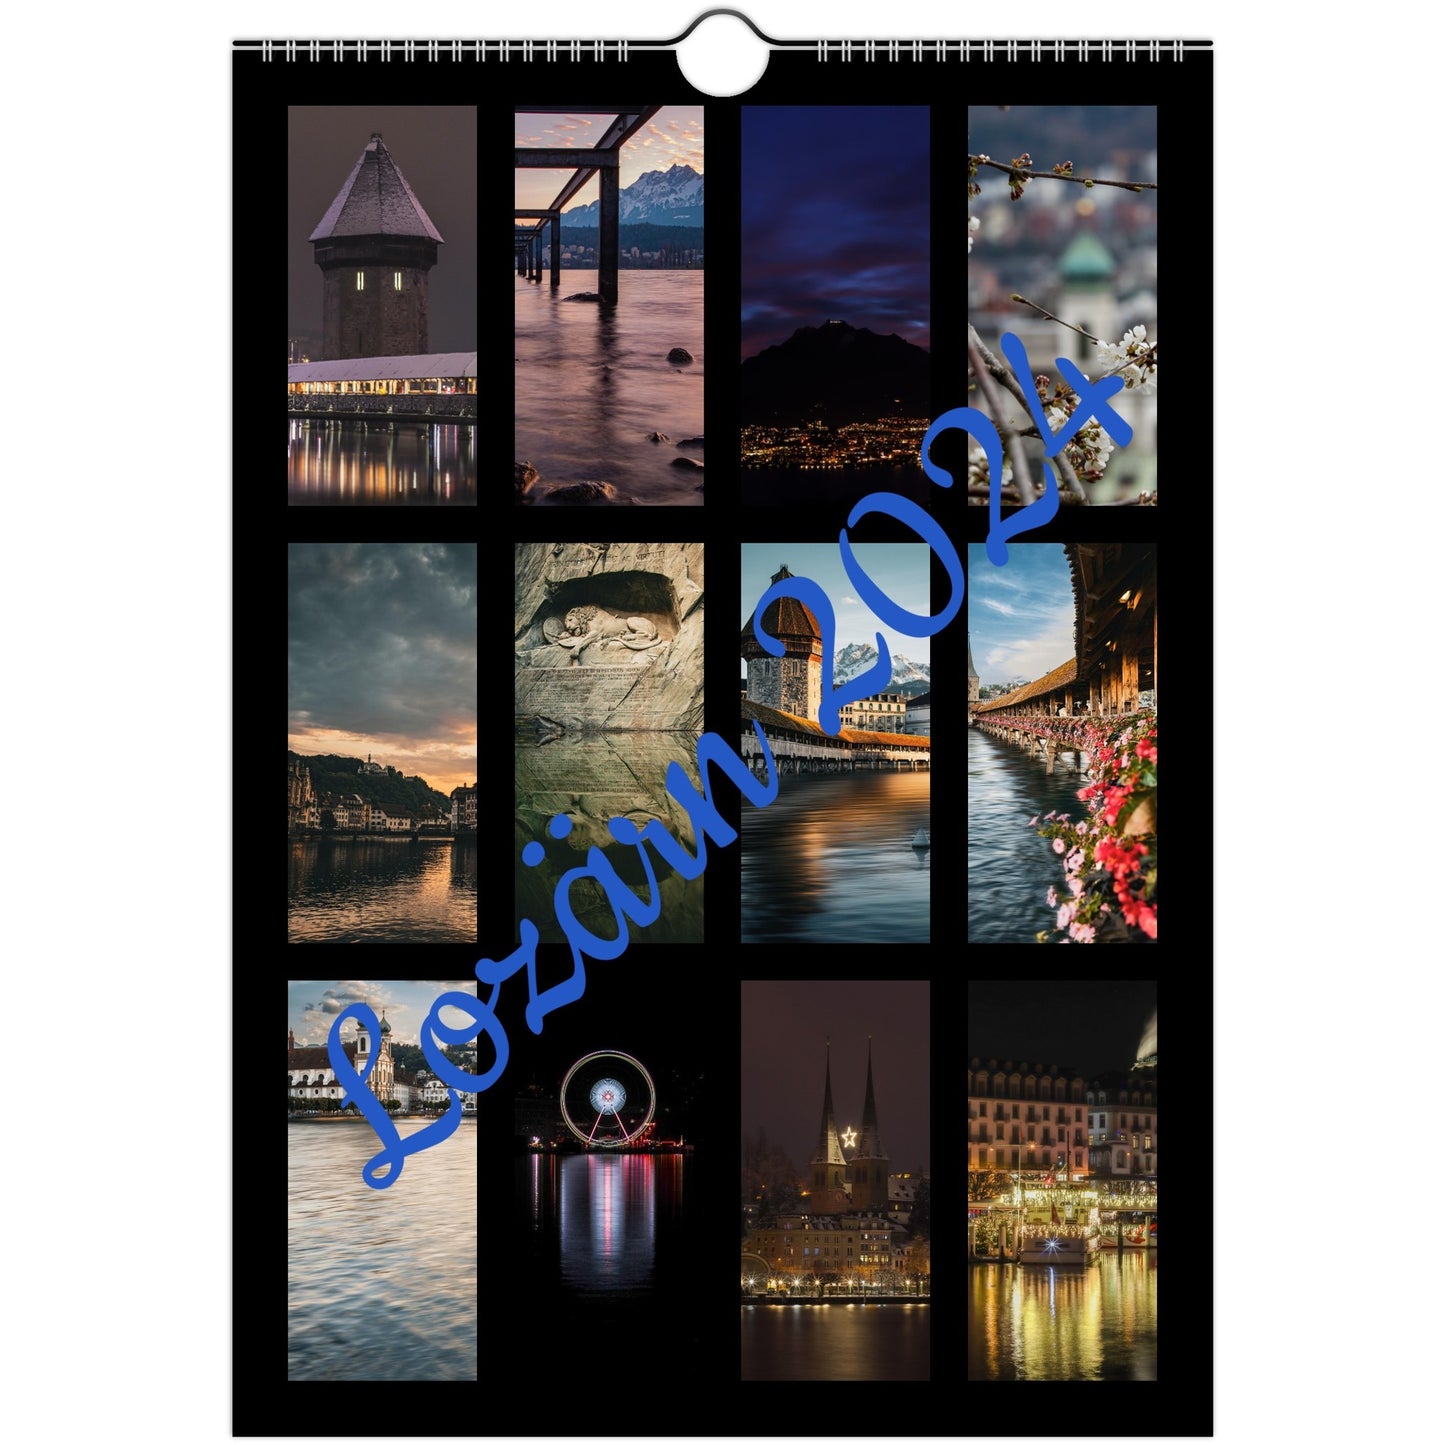 Lucerne wall calendar 2024 (full screen version) – The beauty of Lucerne throughout the year